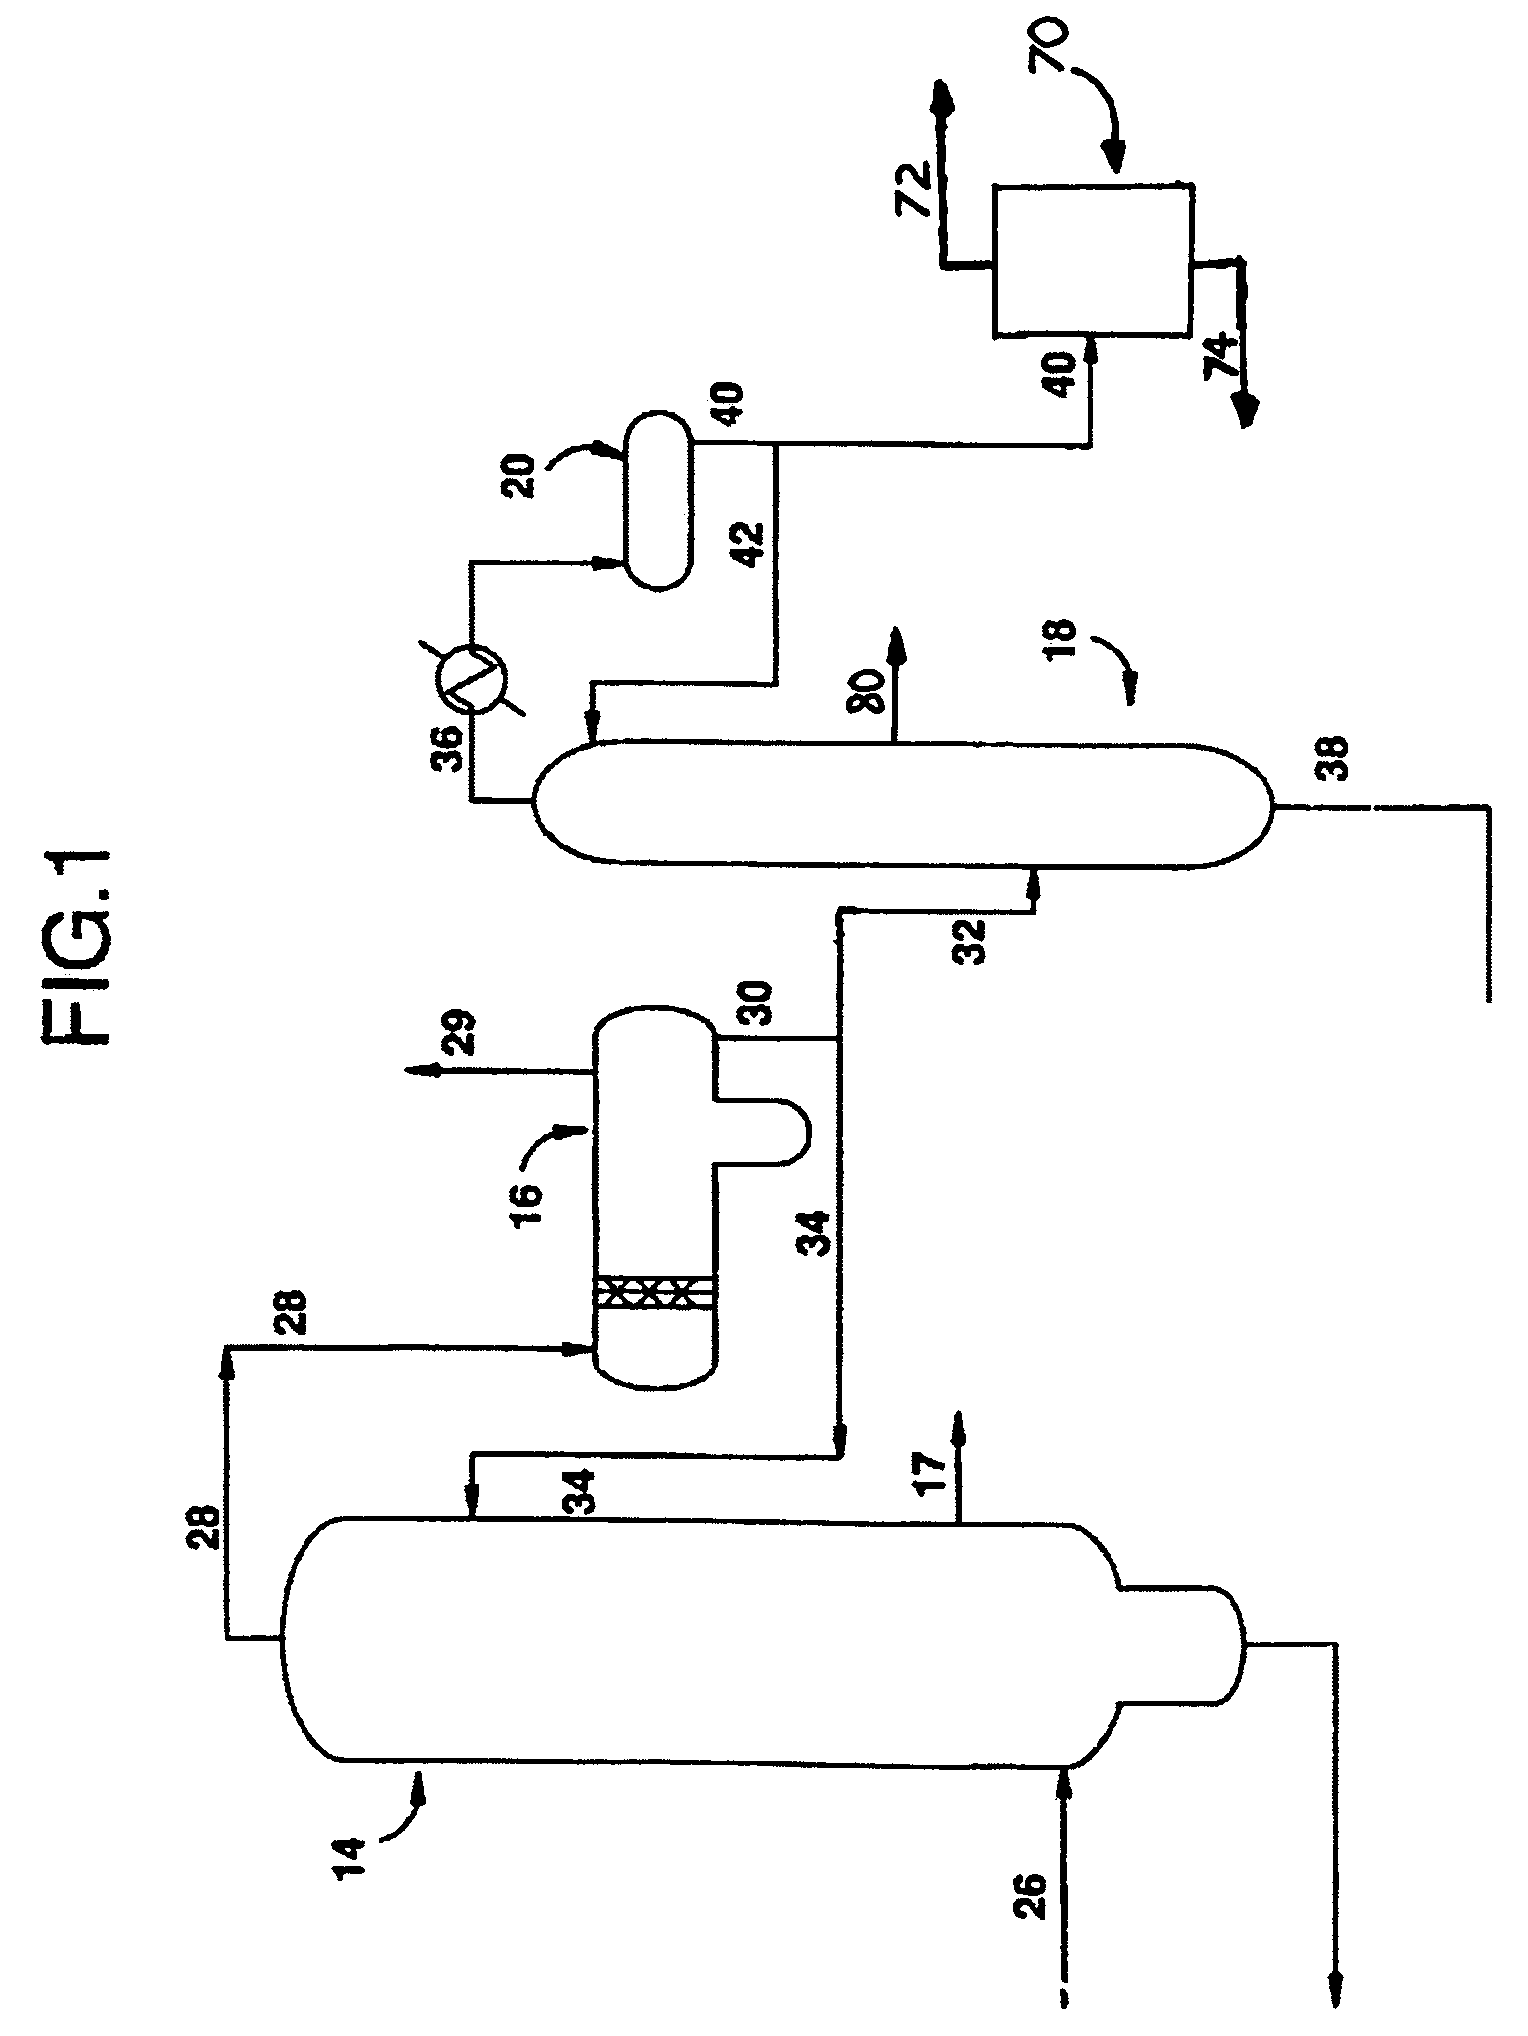 Process for the production of acetic acid